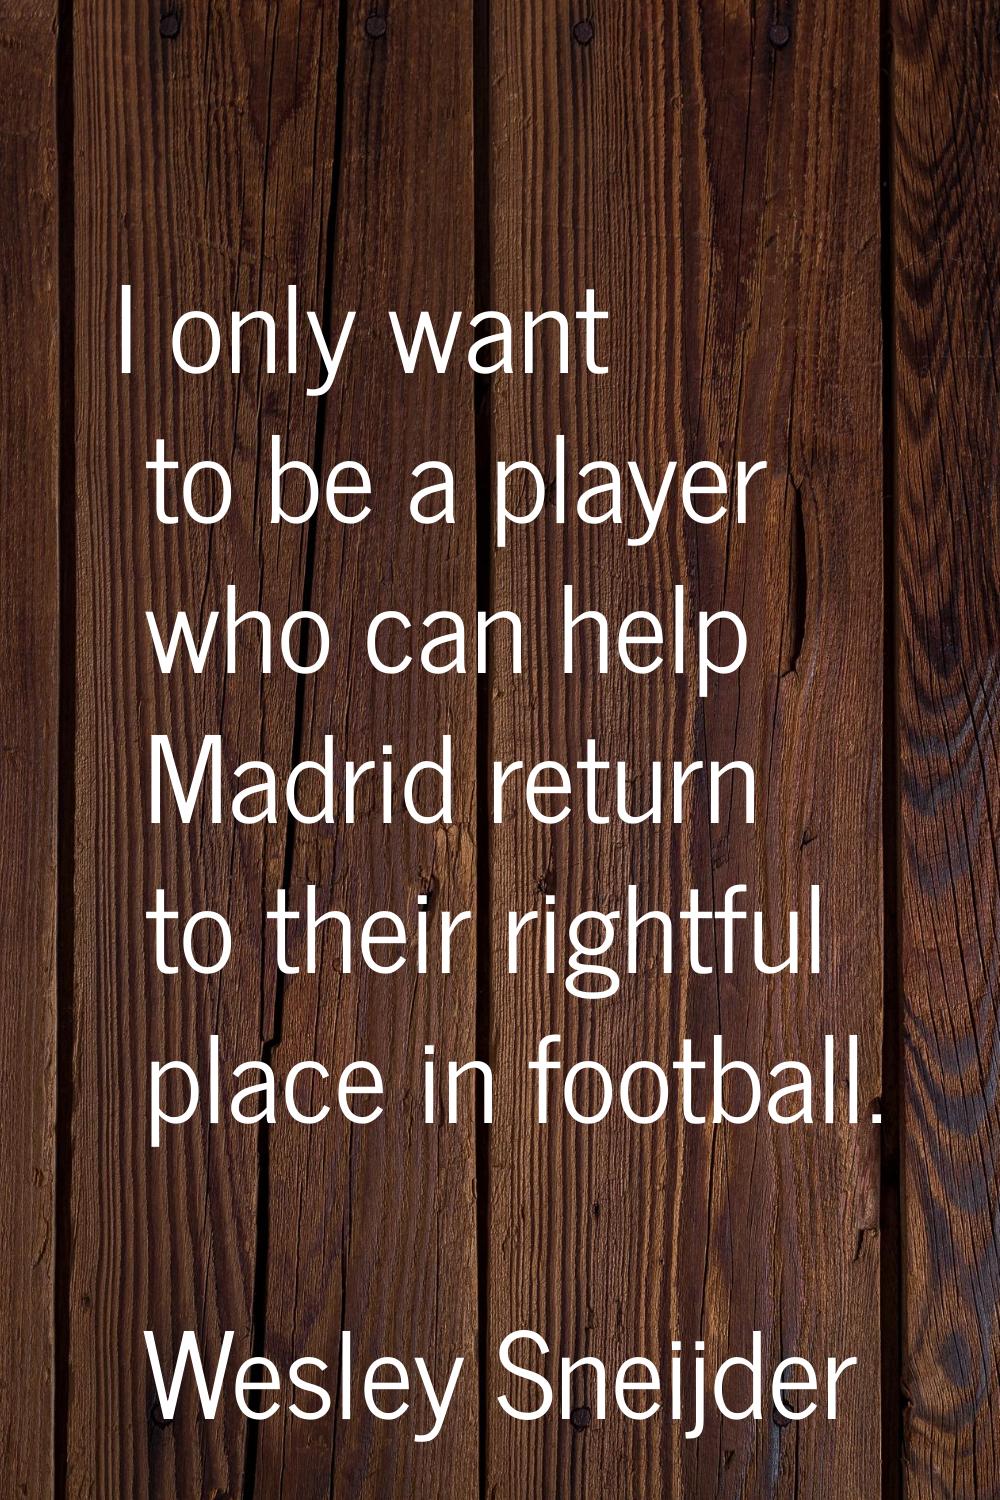 I only want to be a player who can help Madrid return to their rightful place in football.